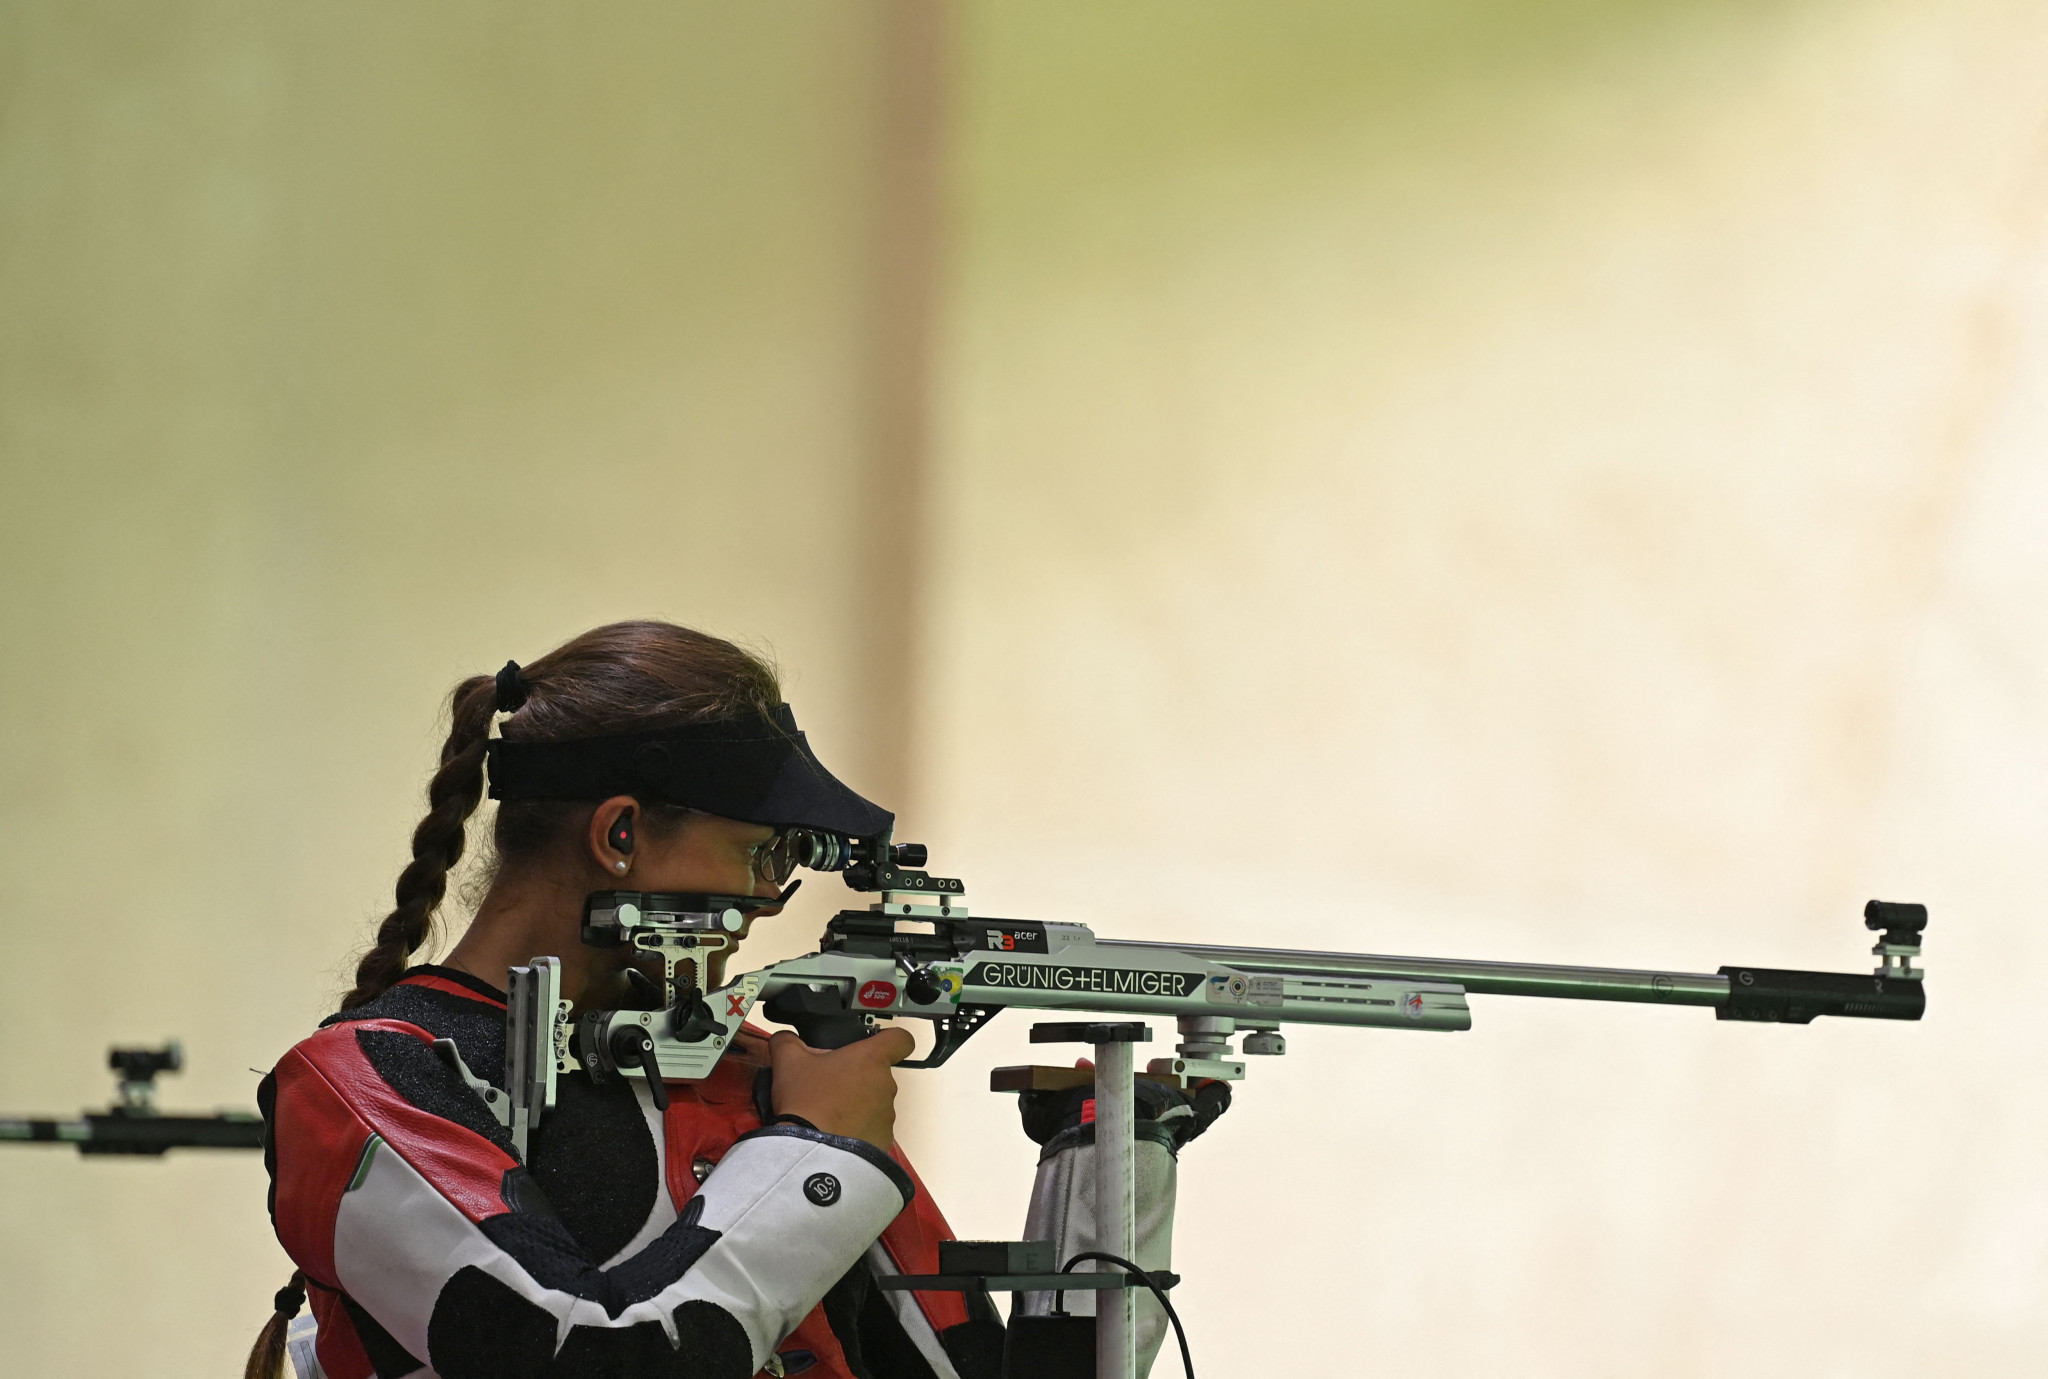 More than 200 athletes registered as Granada hosts ISSF Grand Prix